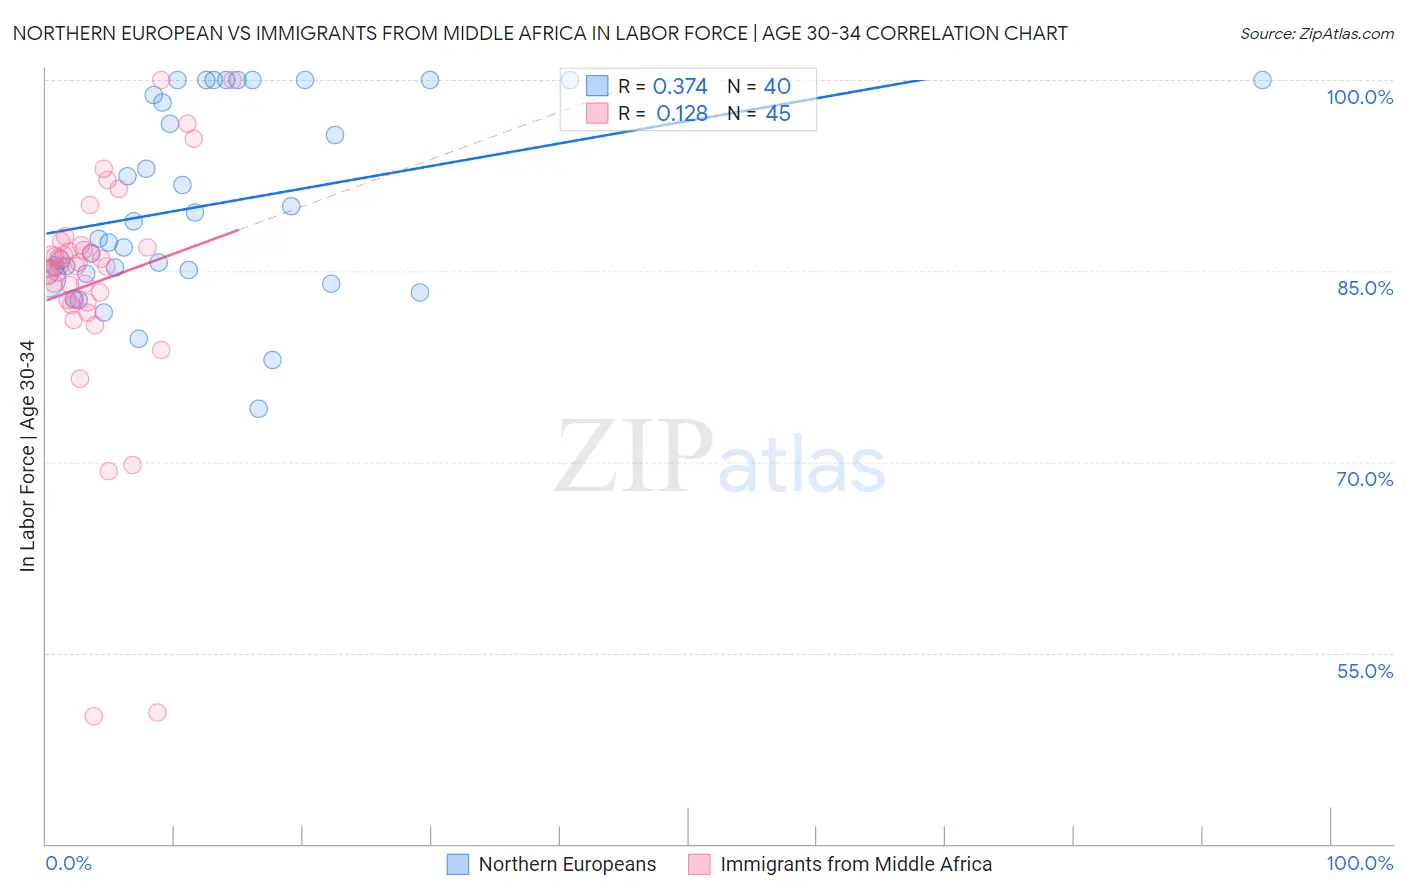 Northern European vs Immigrants from Middle Africa In Labor Force | Age 30-34